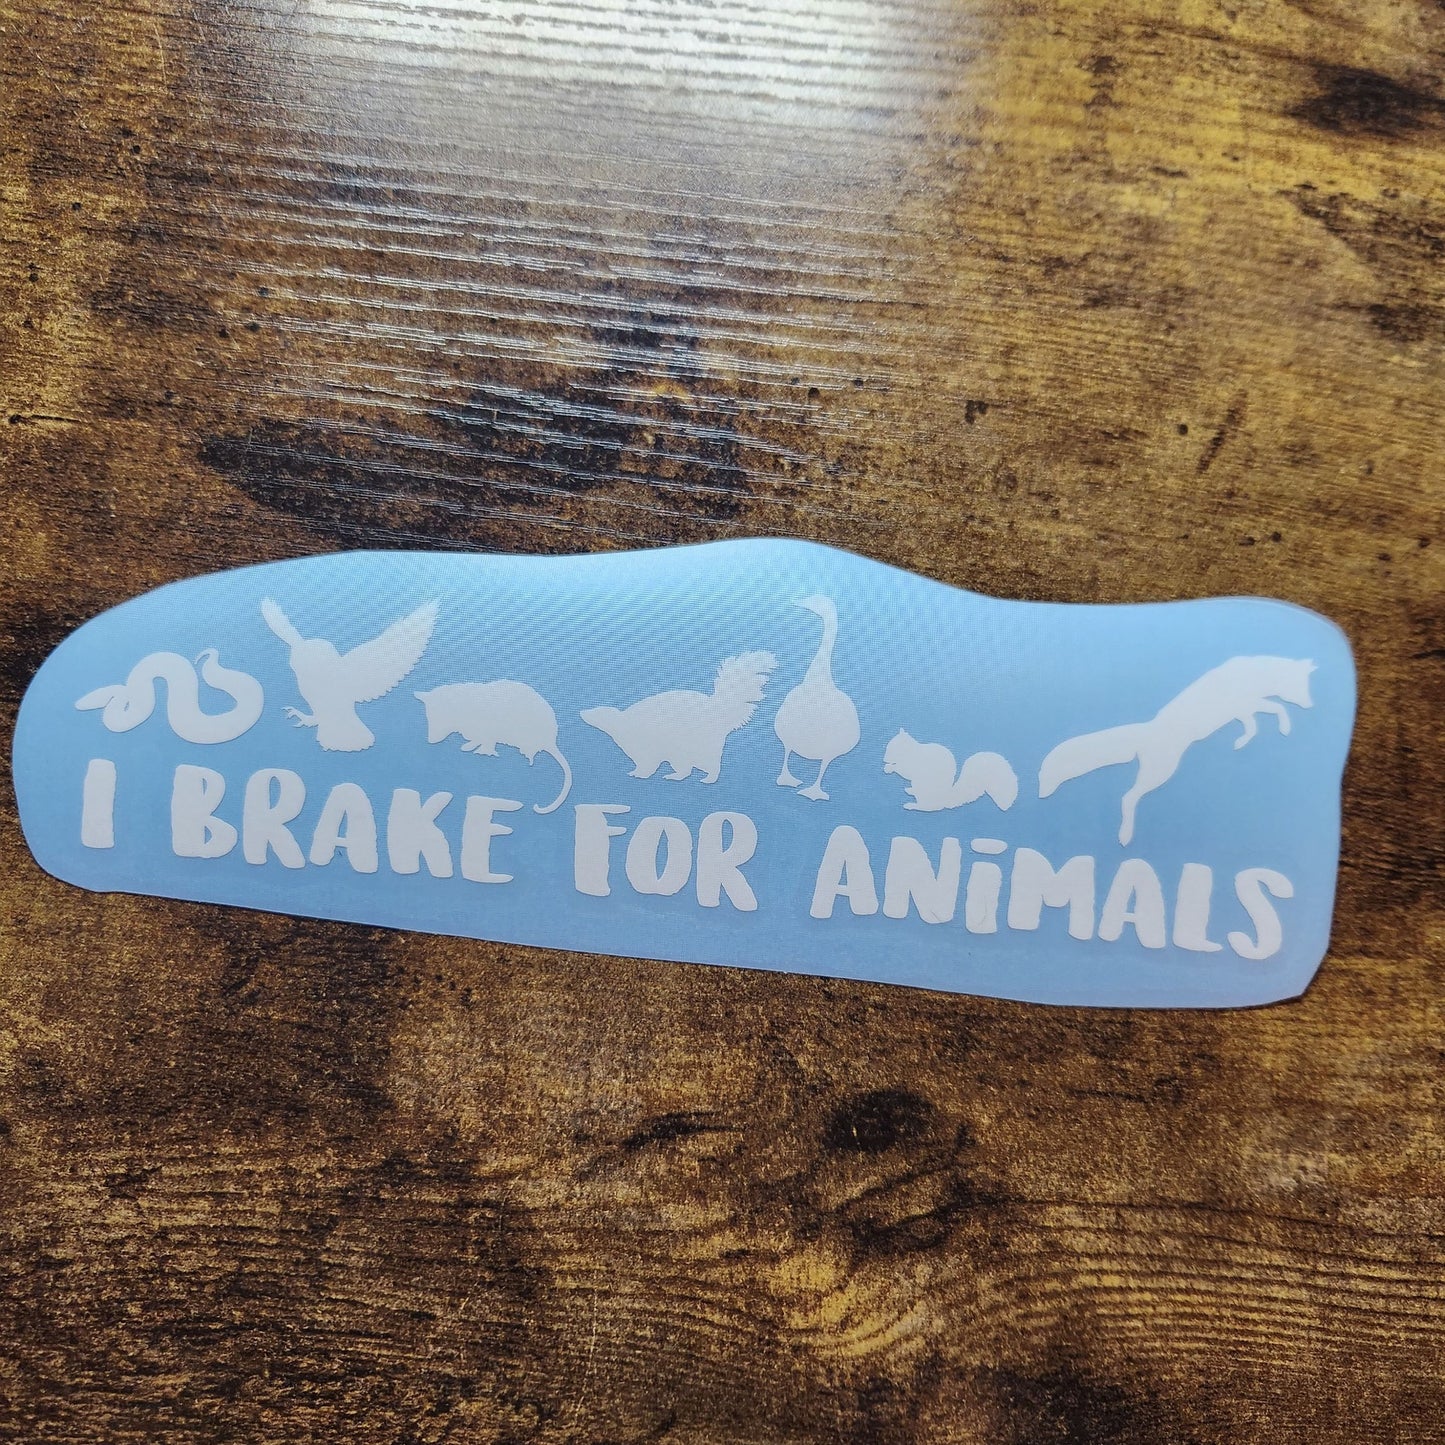 I brake for animals - Vinyl Decal (Made to Order)